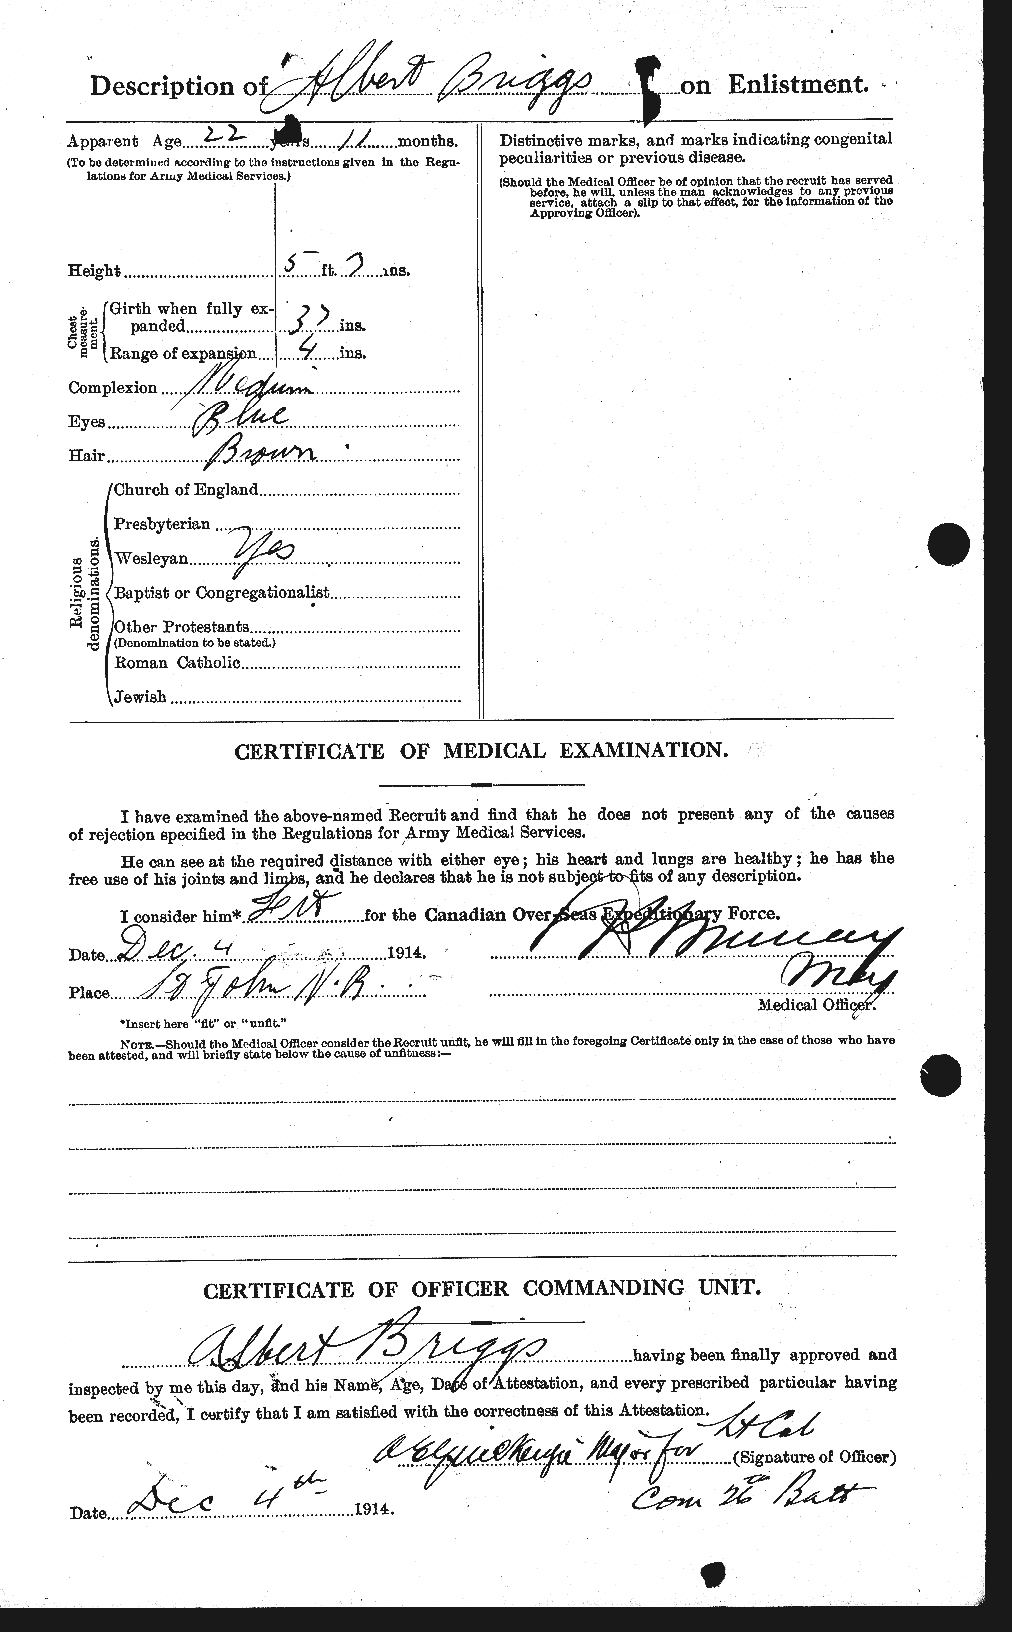 Personnel Records of the First World War - CEF 263953b